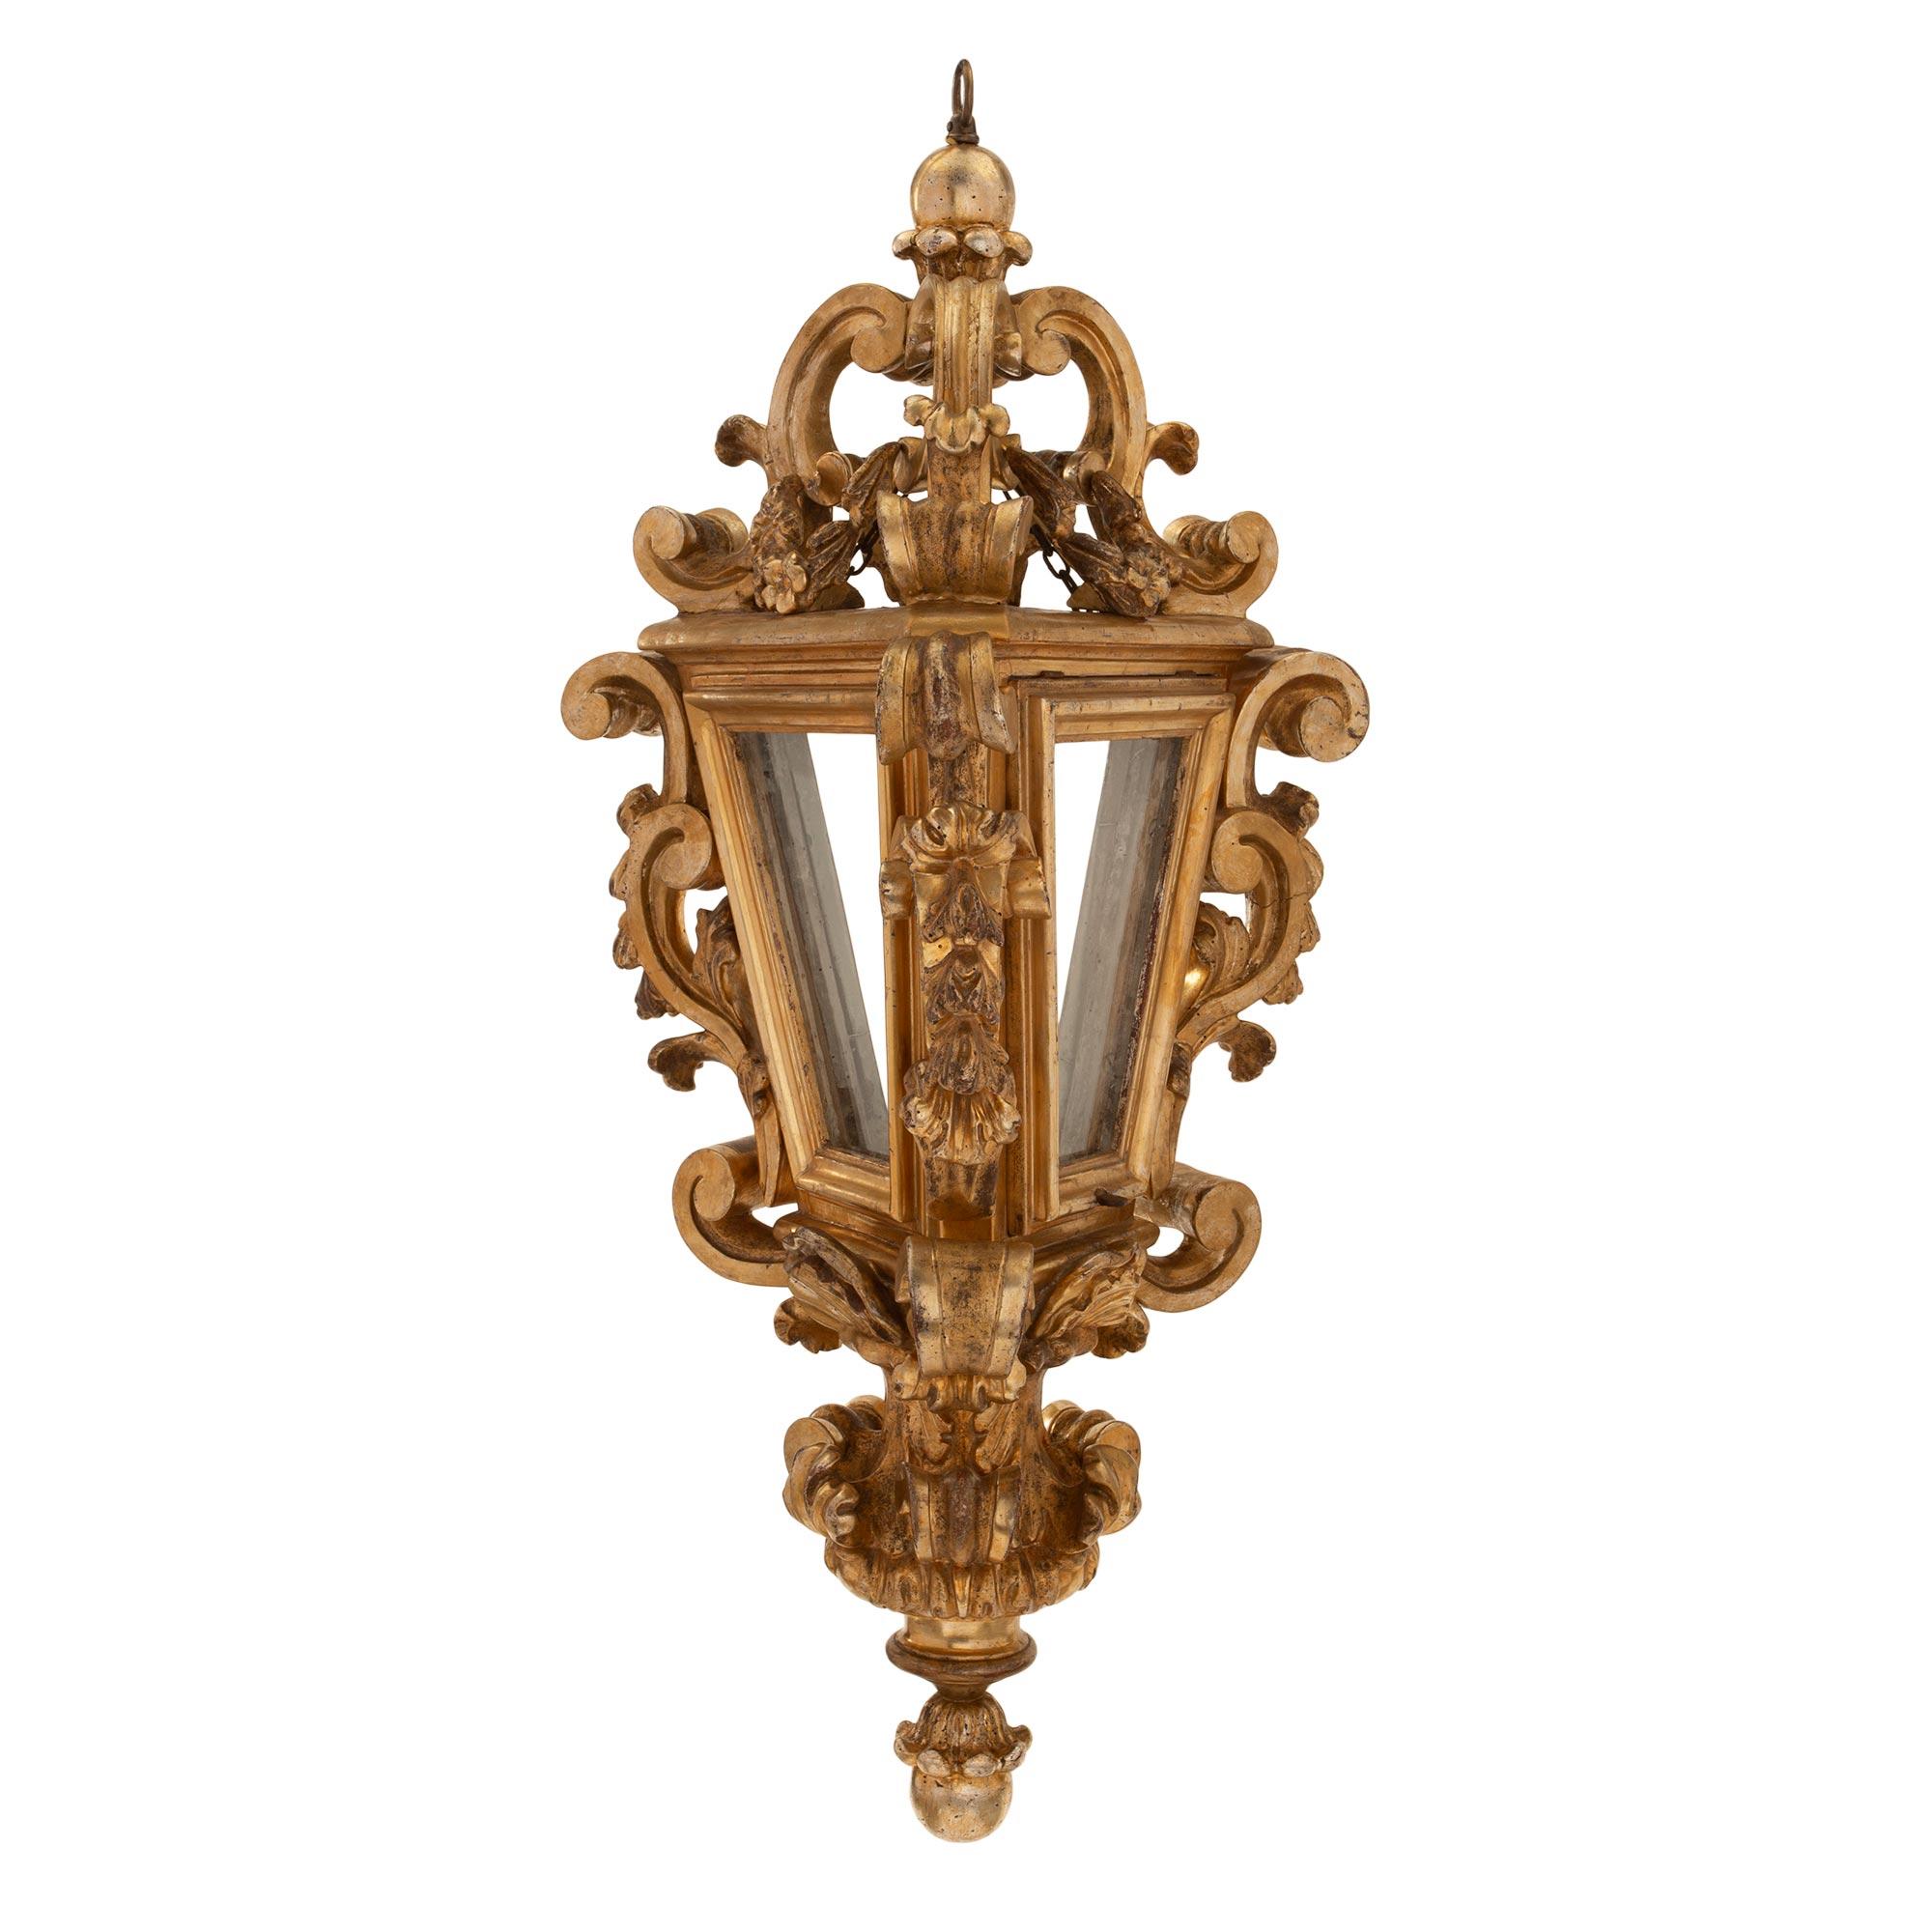 A beautiful pair of Italian 18th century Venetian Mecca lanterns. Each lantern is centered by an elegant bottom foliate finial below rich scrolled designs. The triangular shaped body retains the original glass panes flanked by finely carved and most